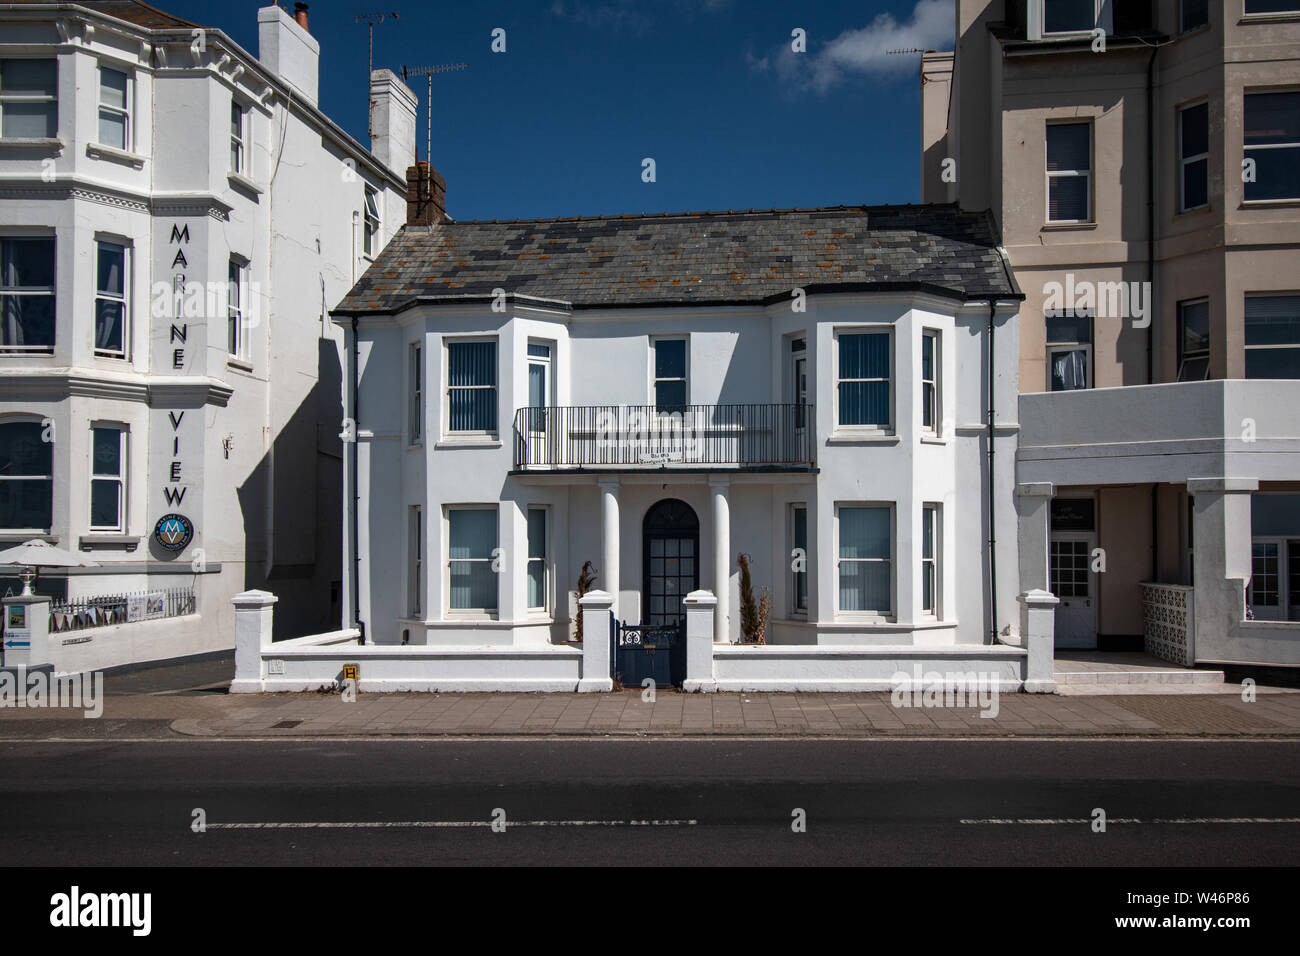 The old coast guard house in Worthing, West Sussex, UK Stock Photo